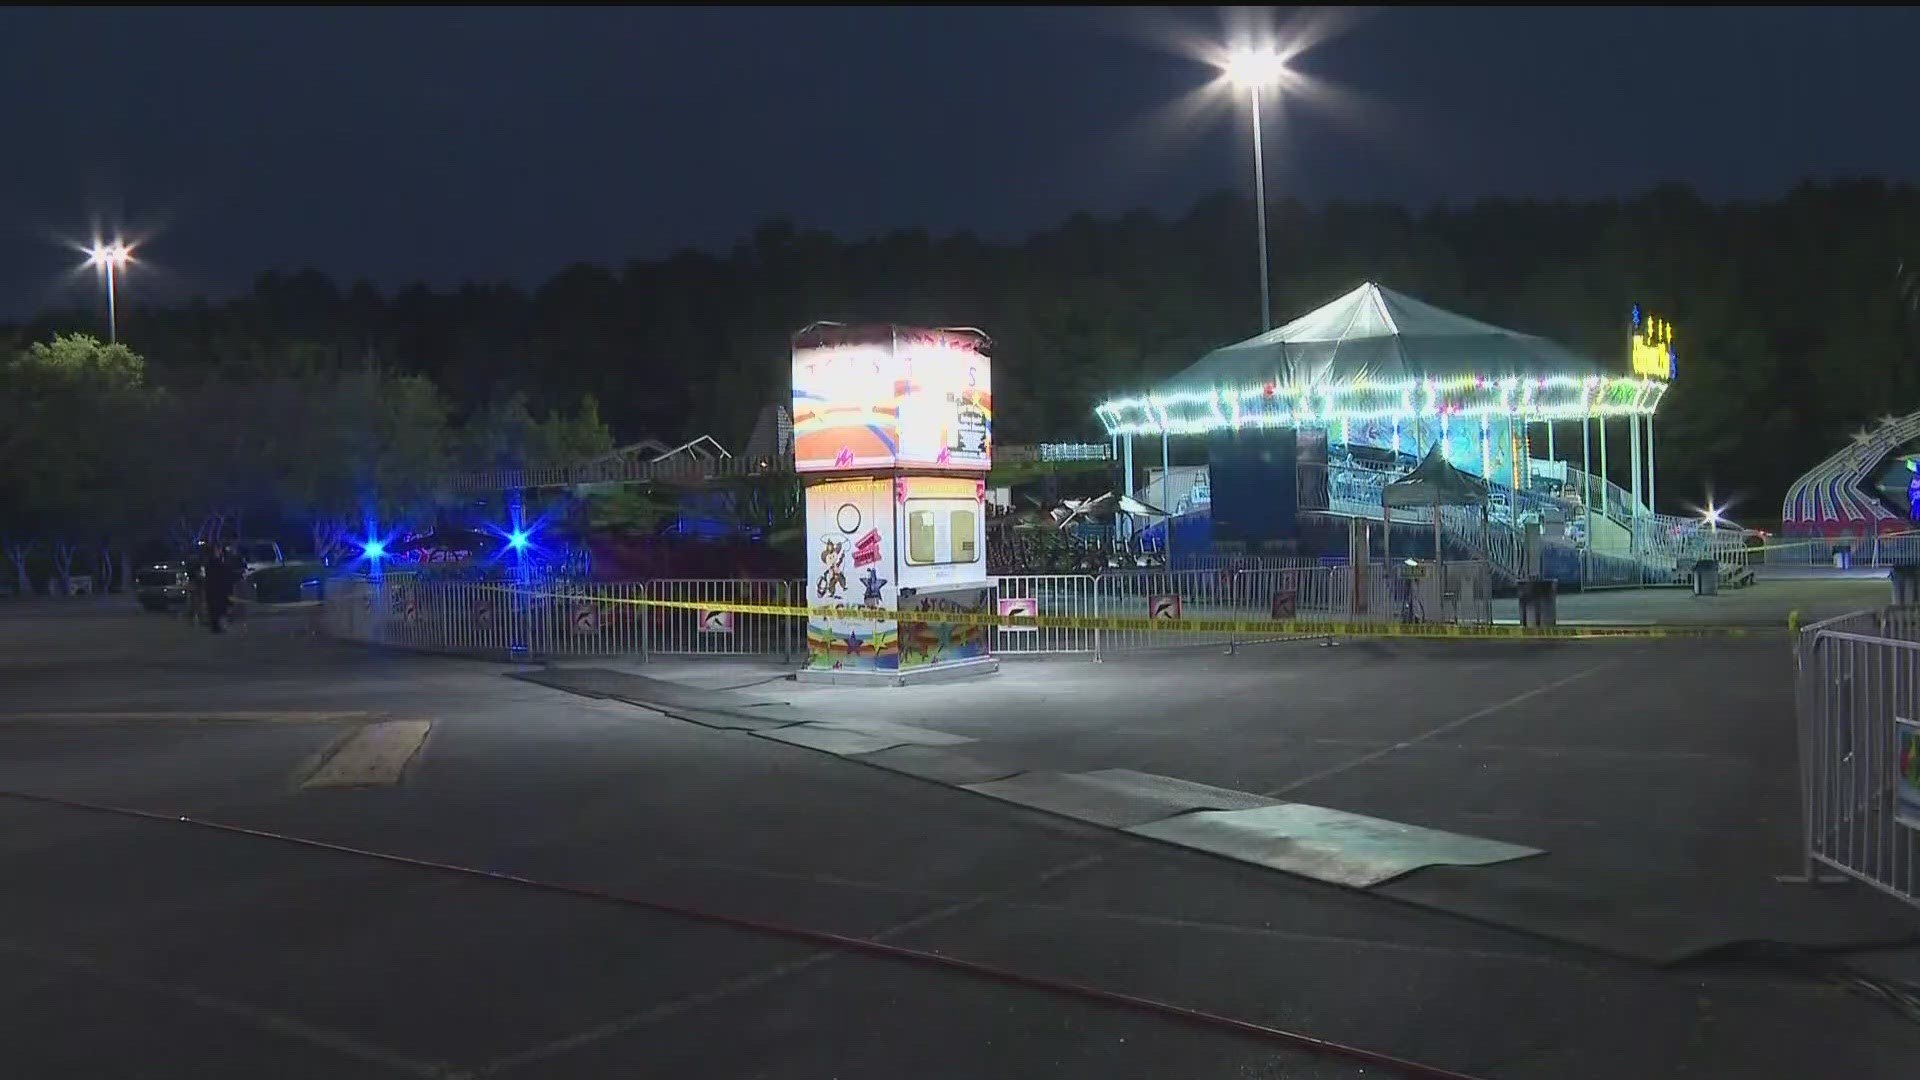 A teenage boy turned himself in to police Friday in connection with the accidental shooting at North Point Mall carnival.